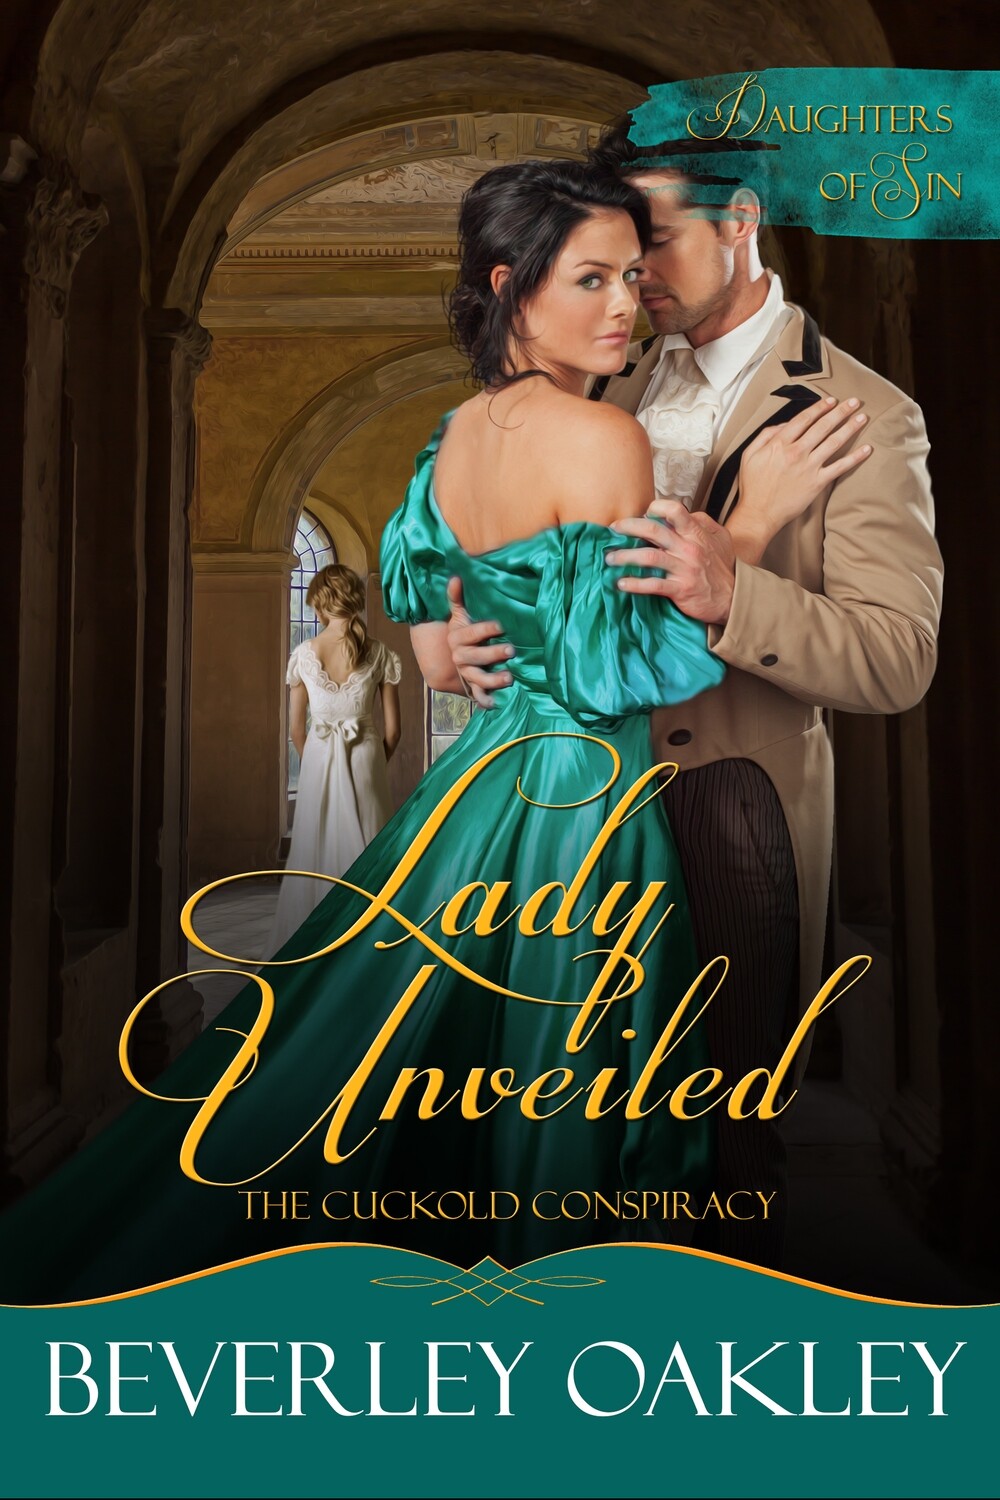 Lady Unveiled: The Cuckold's Conspiracy (#5 - Daughters of Sin)